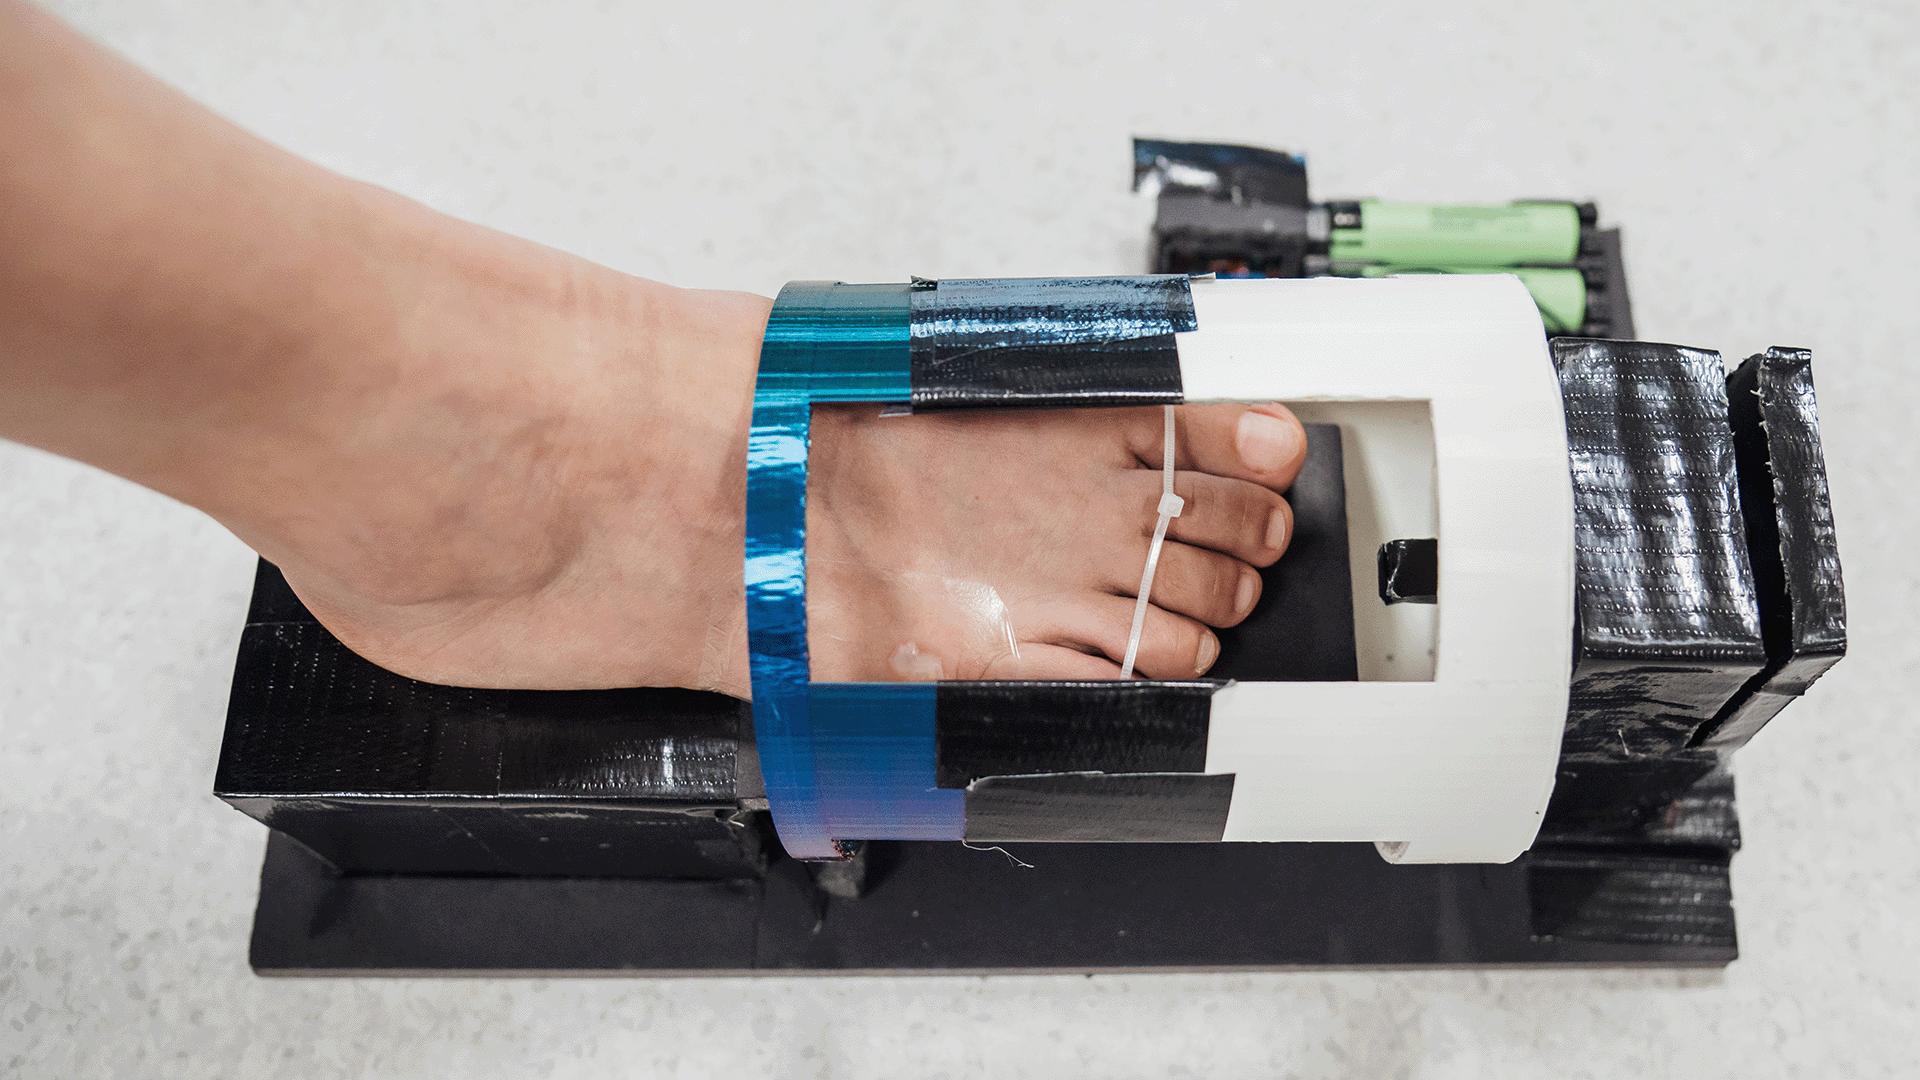 A bandage pre-loaded with magnetic hydrogel is placed on the wound, and an external device is used to accelerate the wound-healing process.